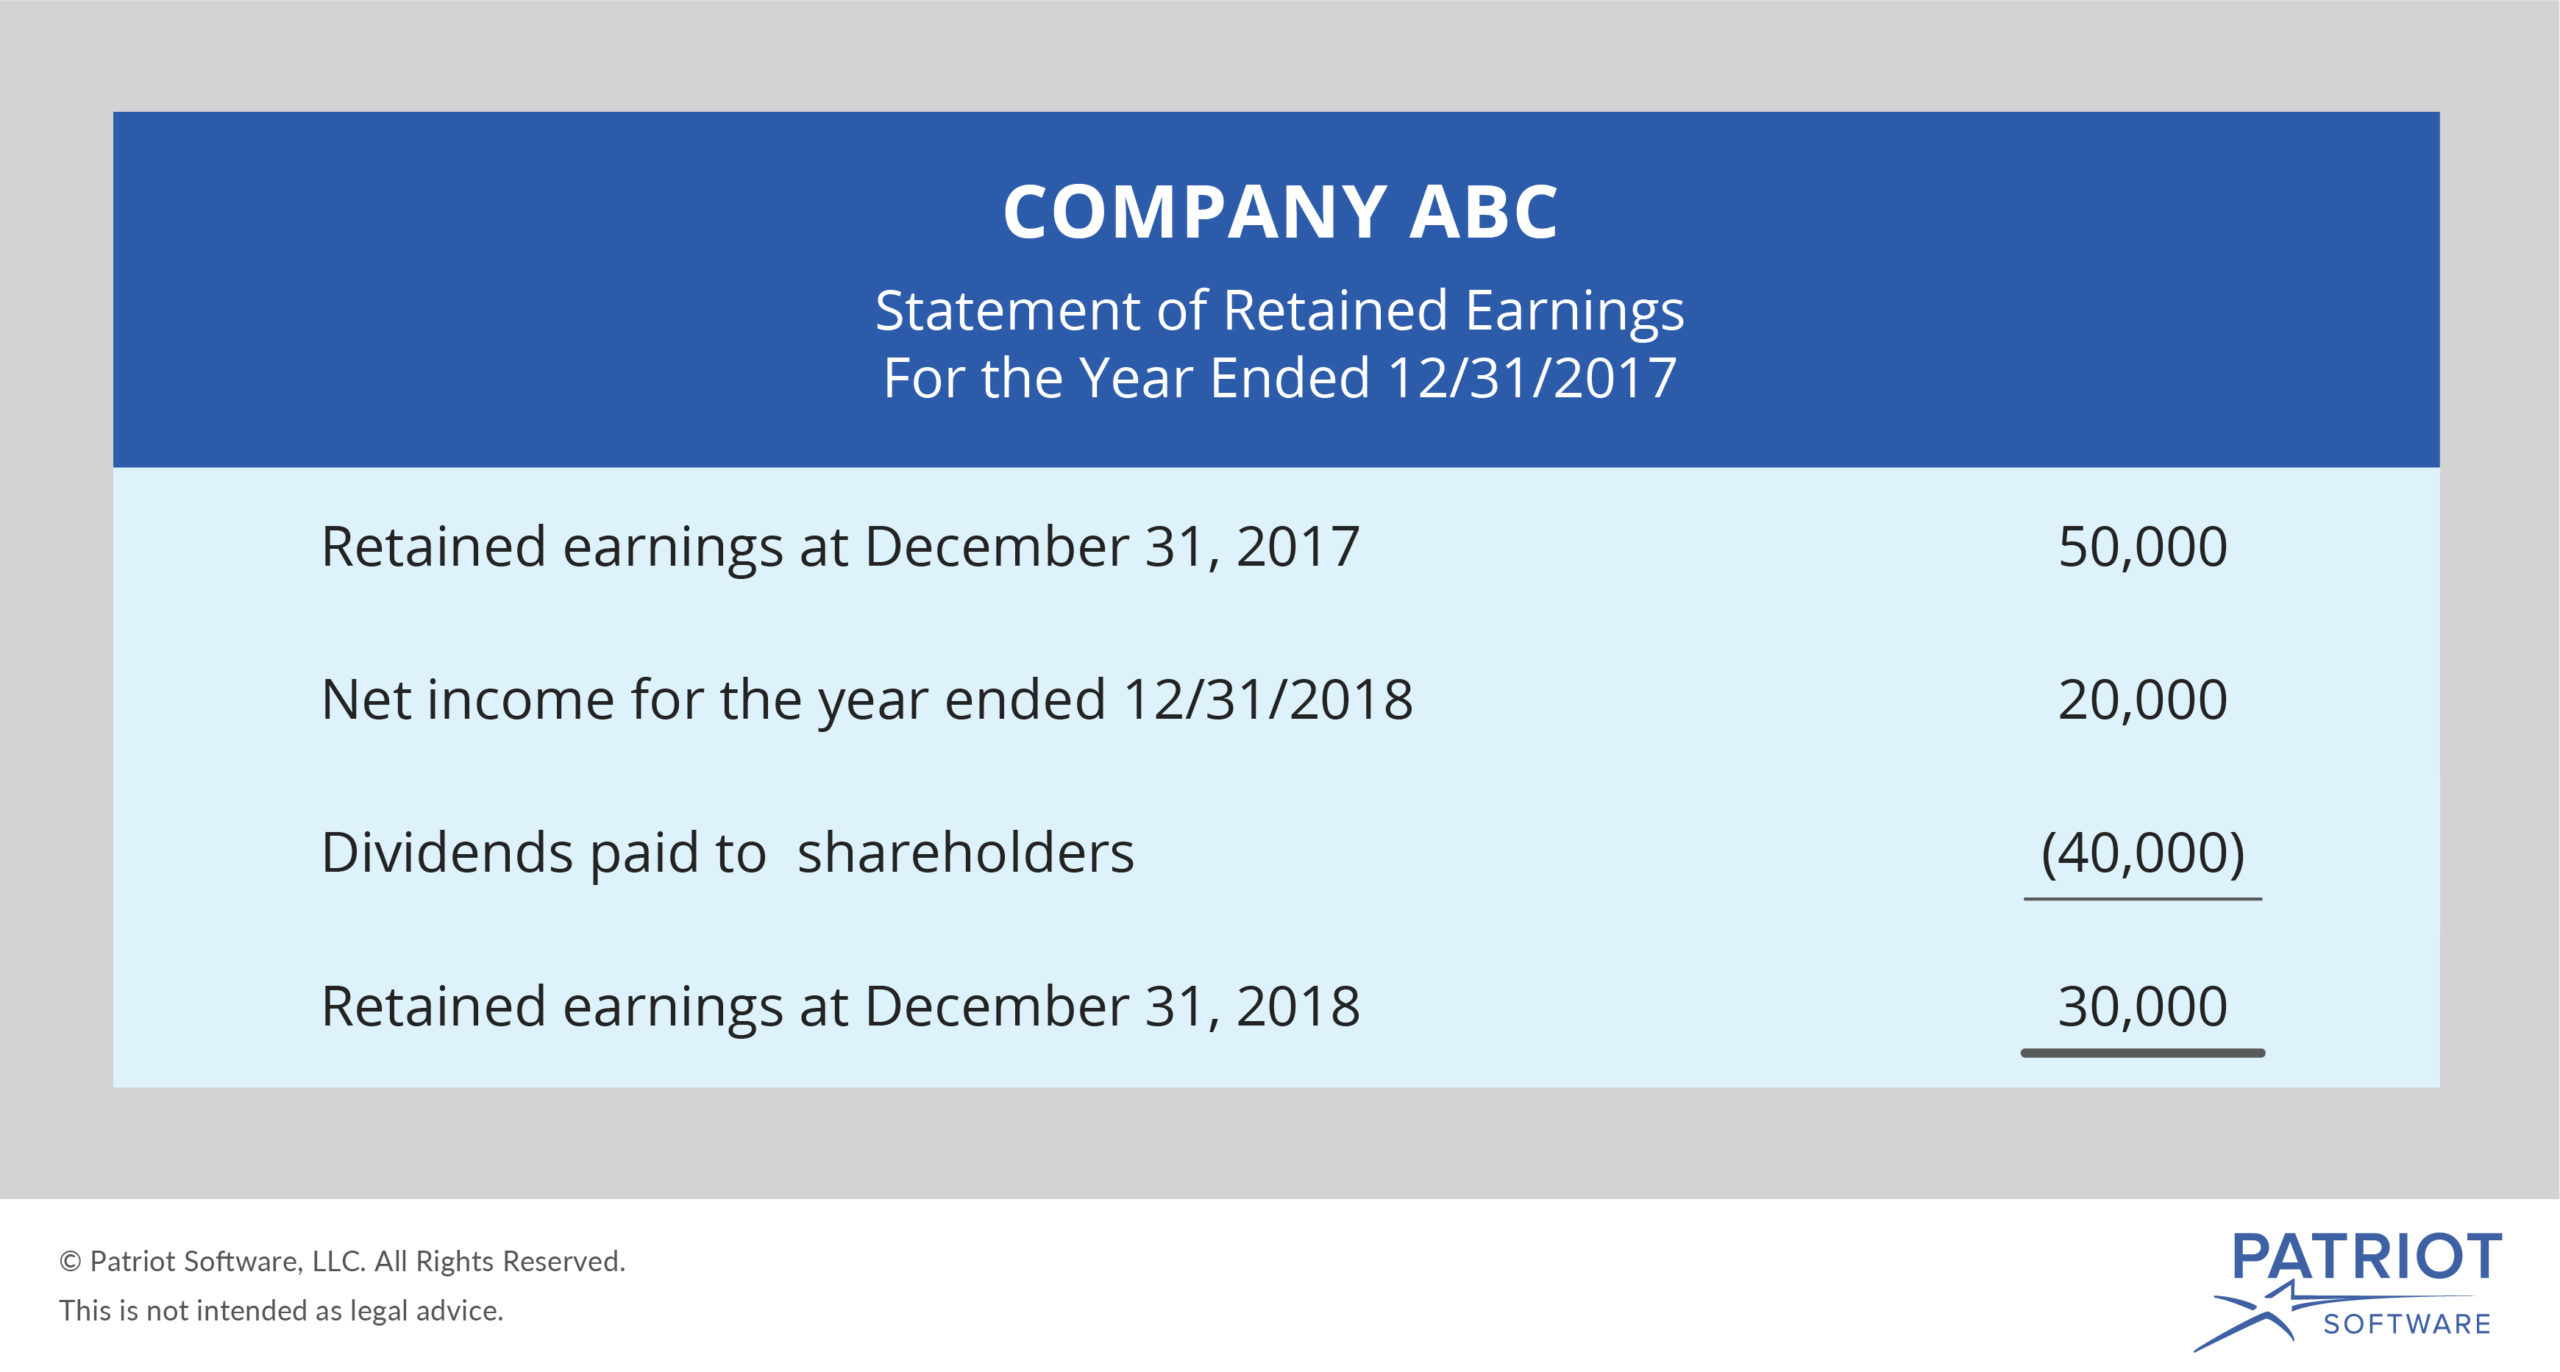 Retained earnings